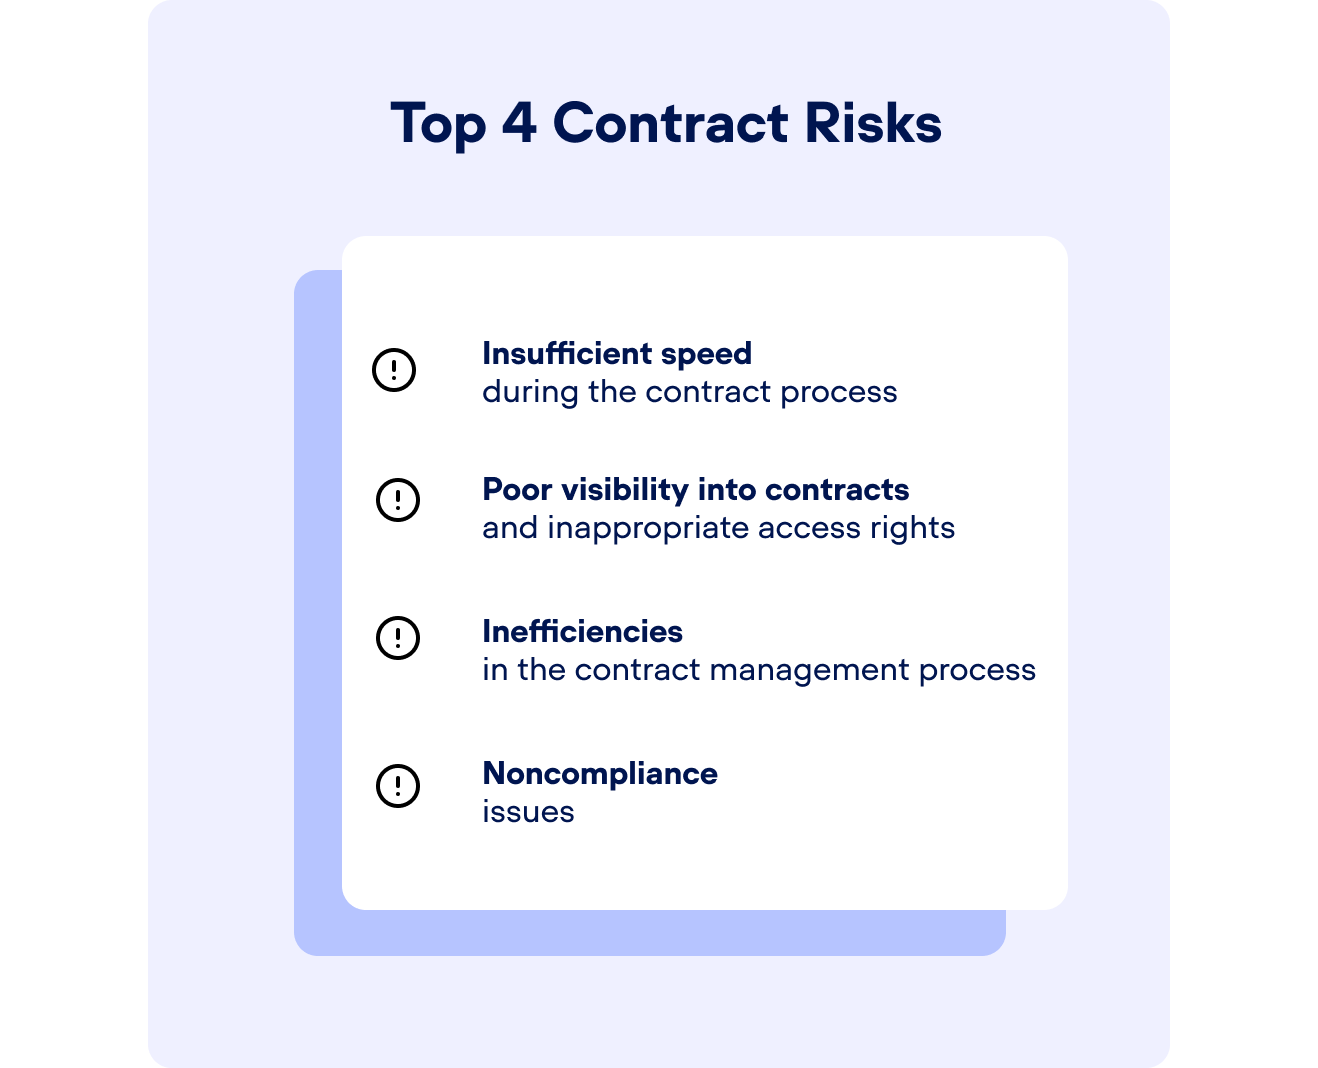 Illustration showing the top 4 contract risks: insufficient speed during the contract process, poor visibility into contracts and inappropriate access rights, lack of compliance, contract management process inefficiencies.